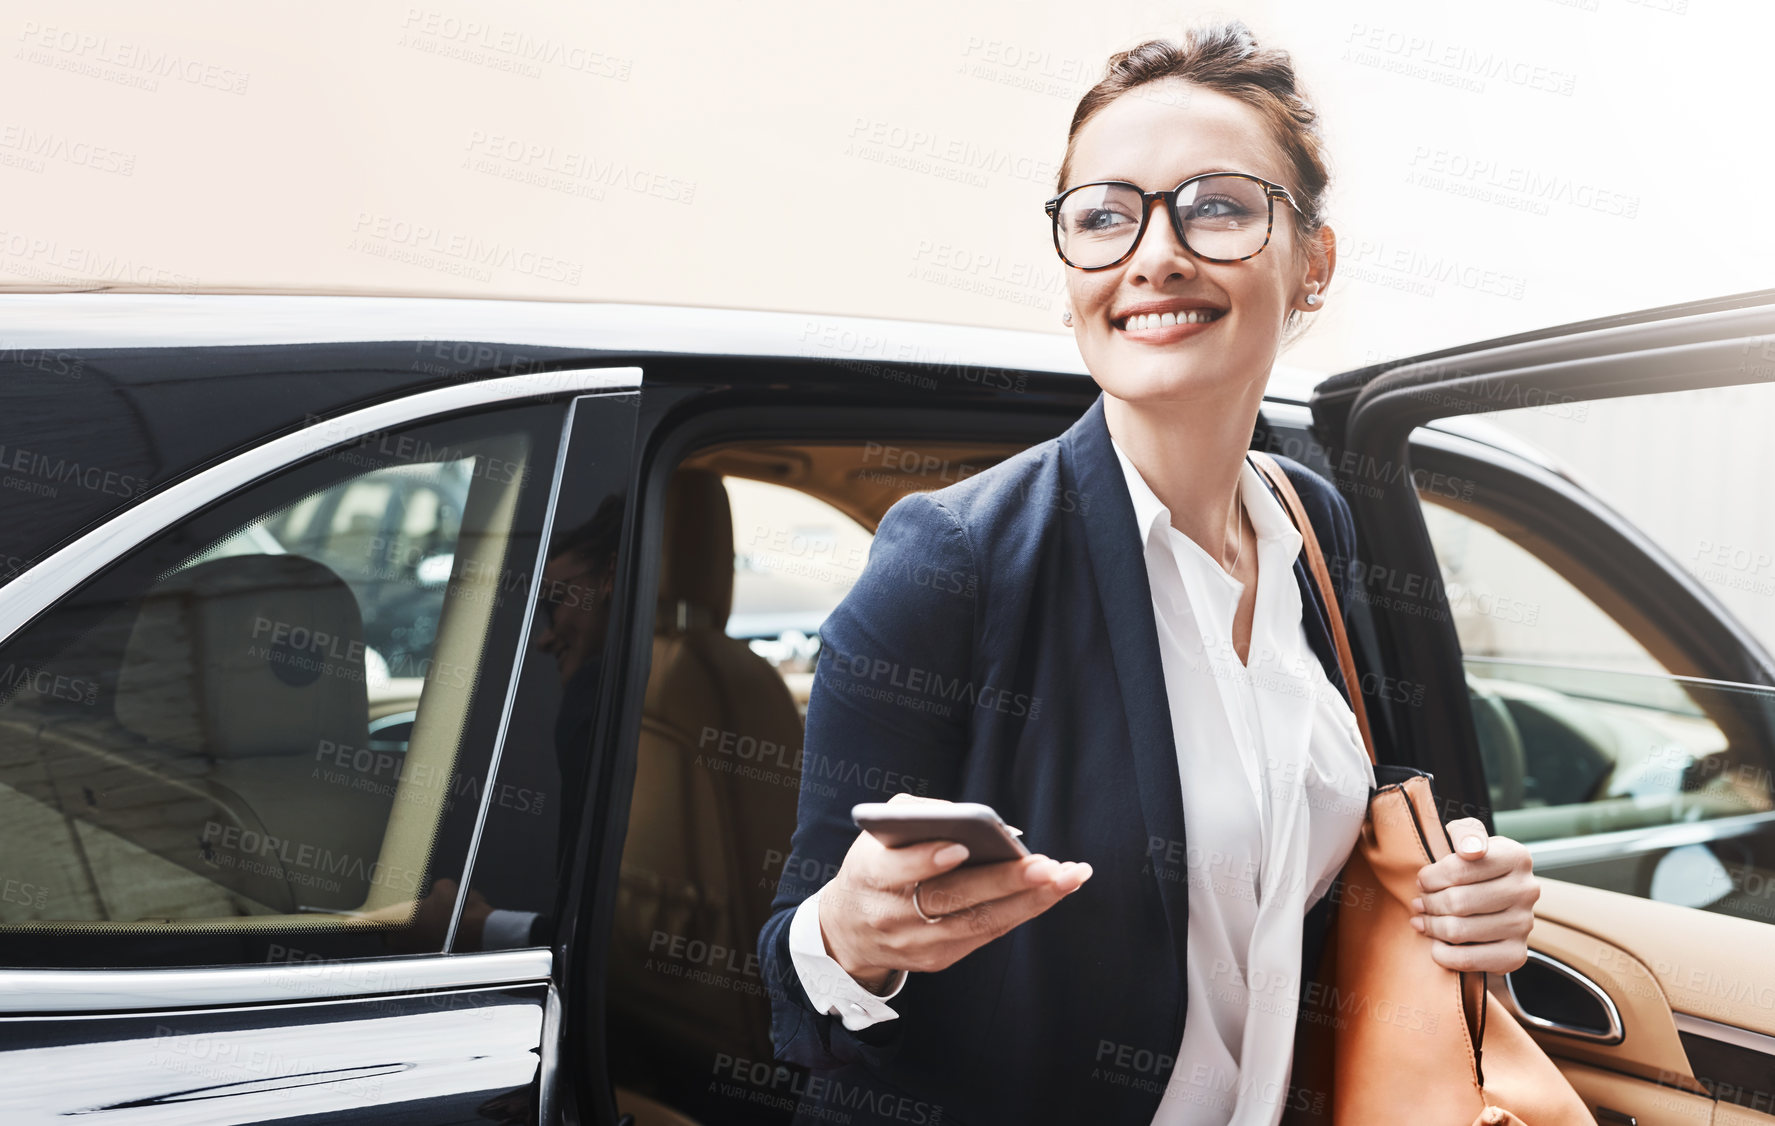 Buy stock photo Shot of a cheerful young businesswoman getting out of a car while holding a cellphone outside during the day